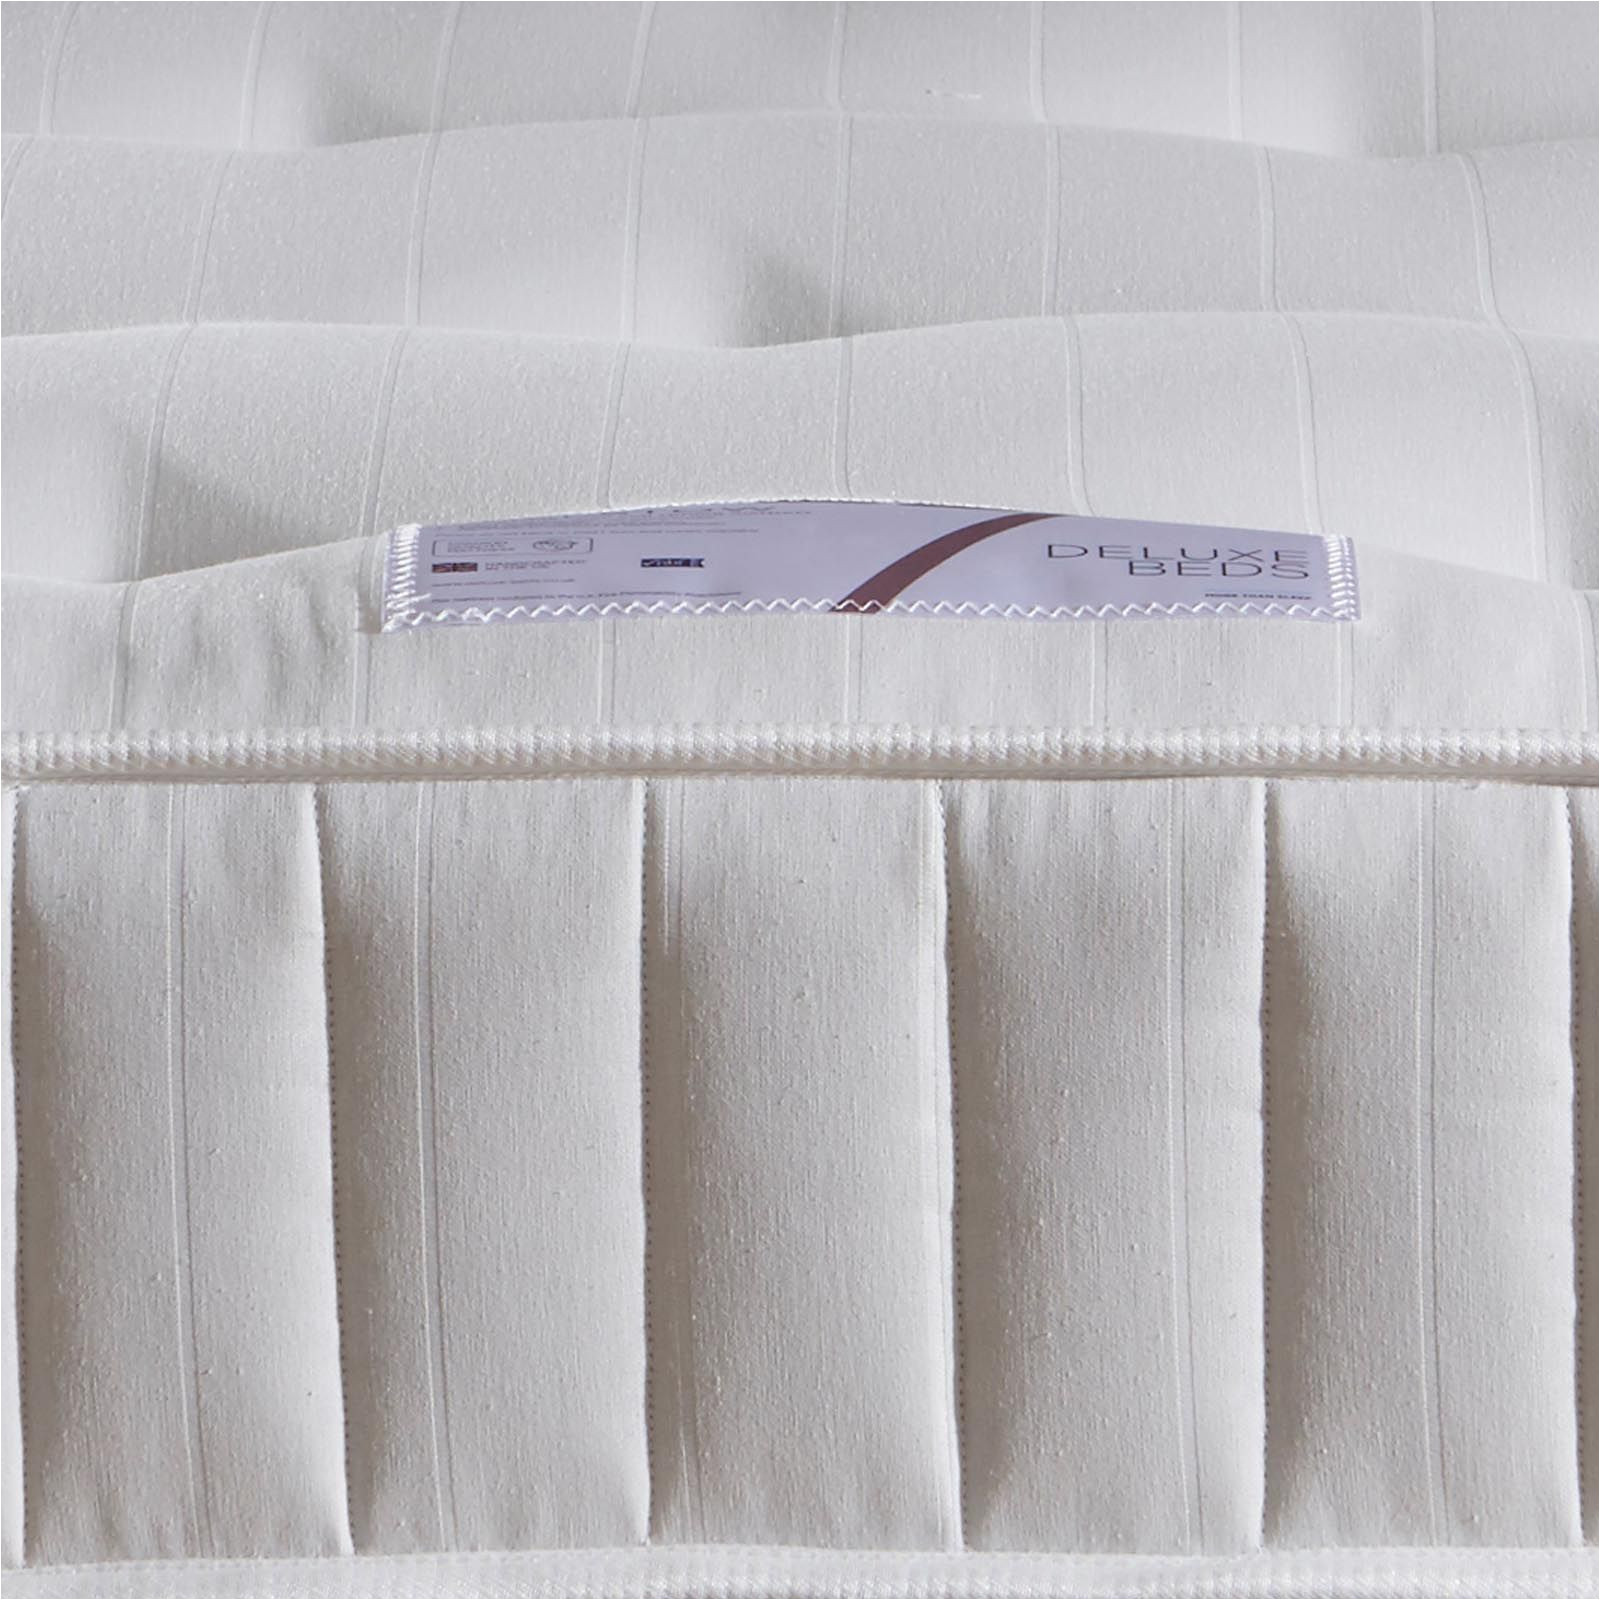 a premium medium to firm mattress using agro open coil springs combined with luxurious polyester